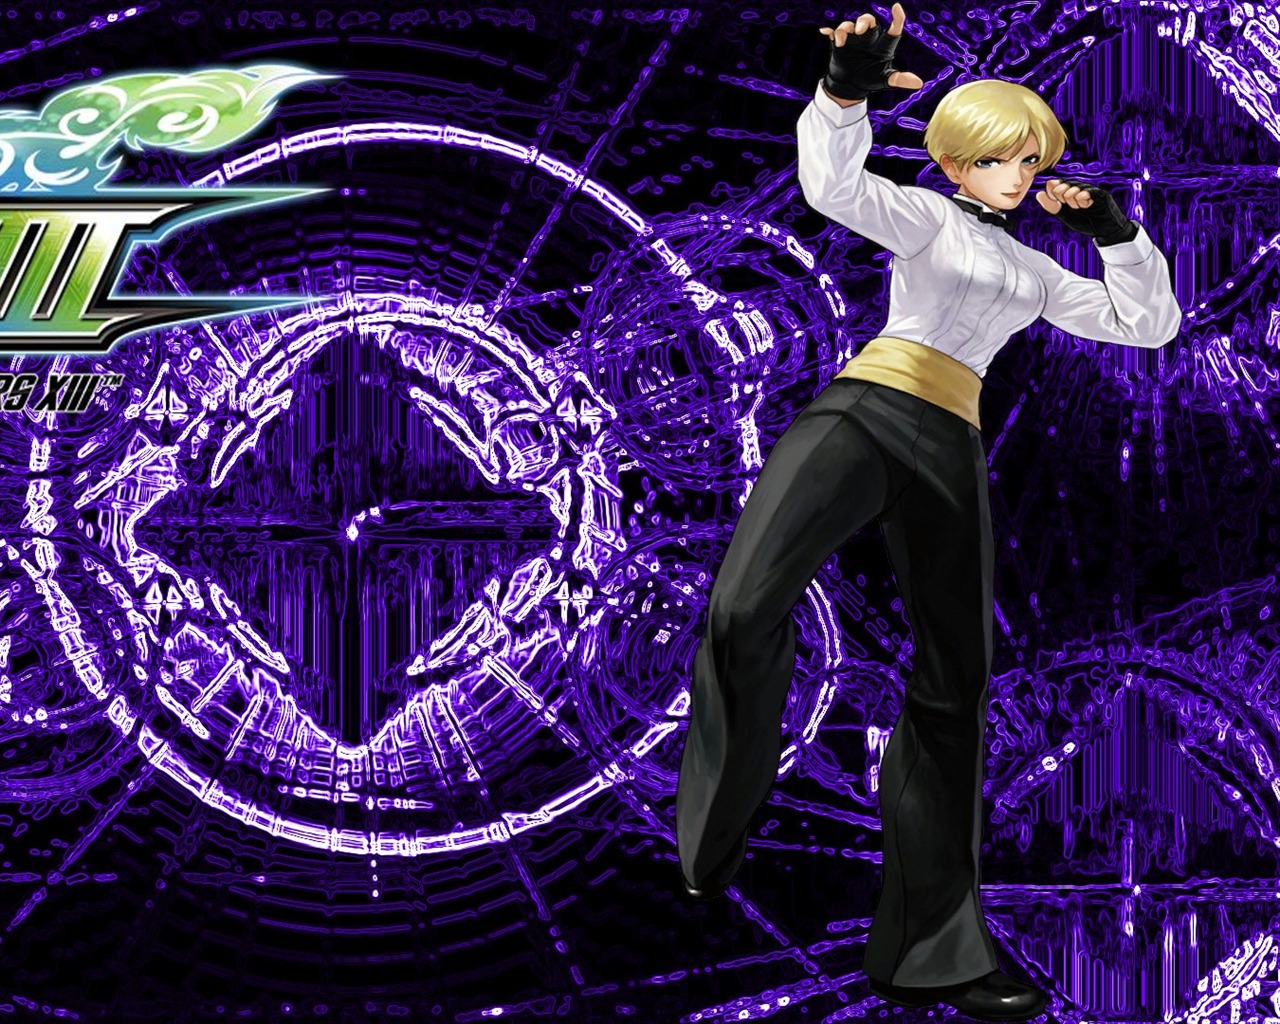 The King of Fighters XIII wallpapers #9 - 1280x1024